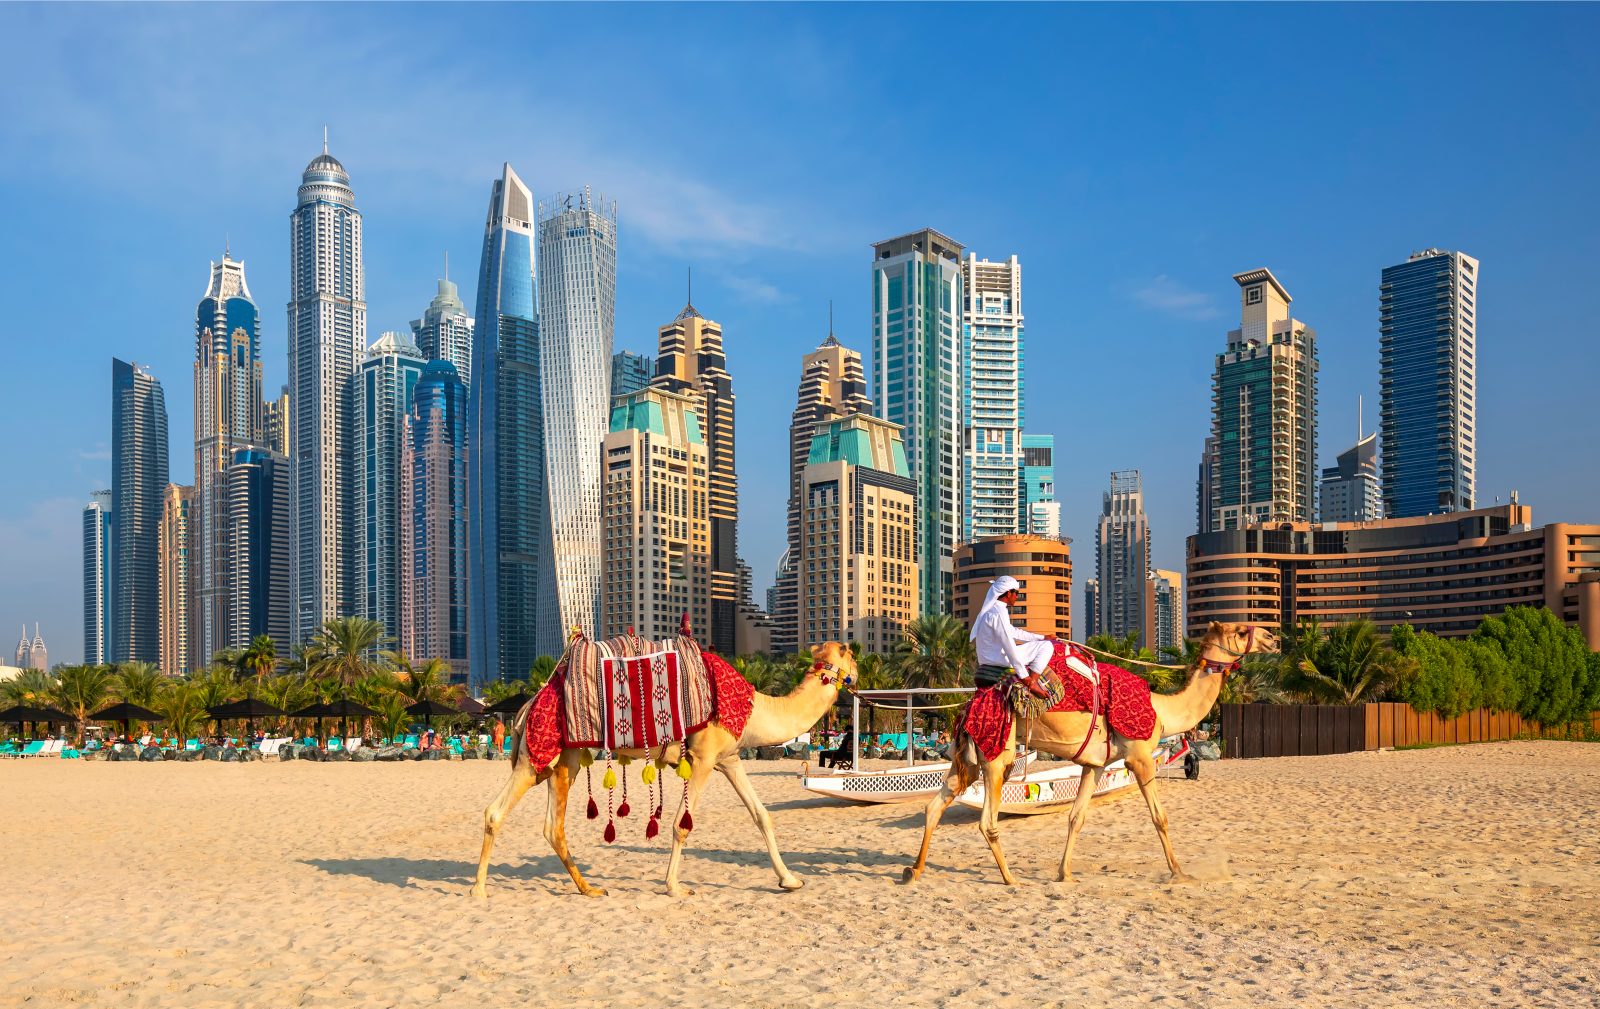 a man riding camels on a beach with a city in the background